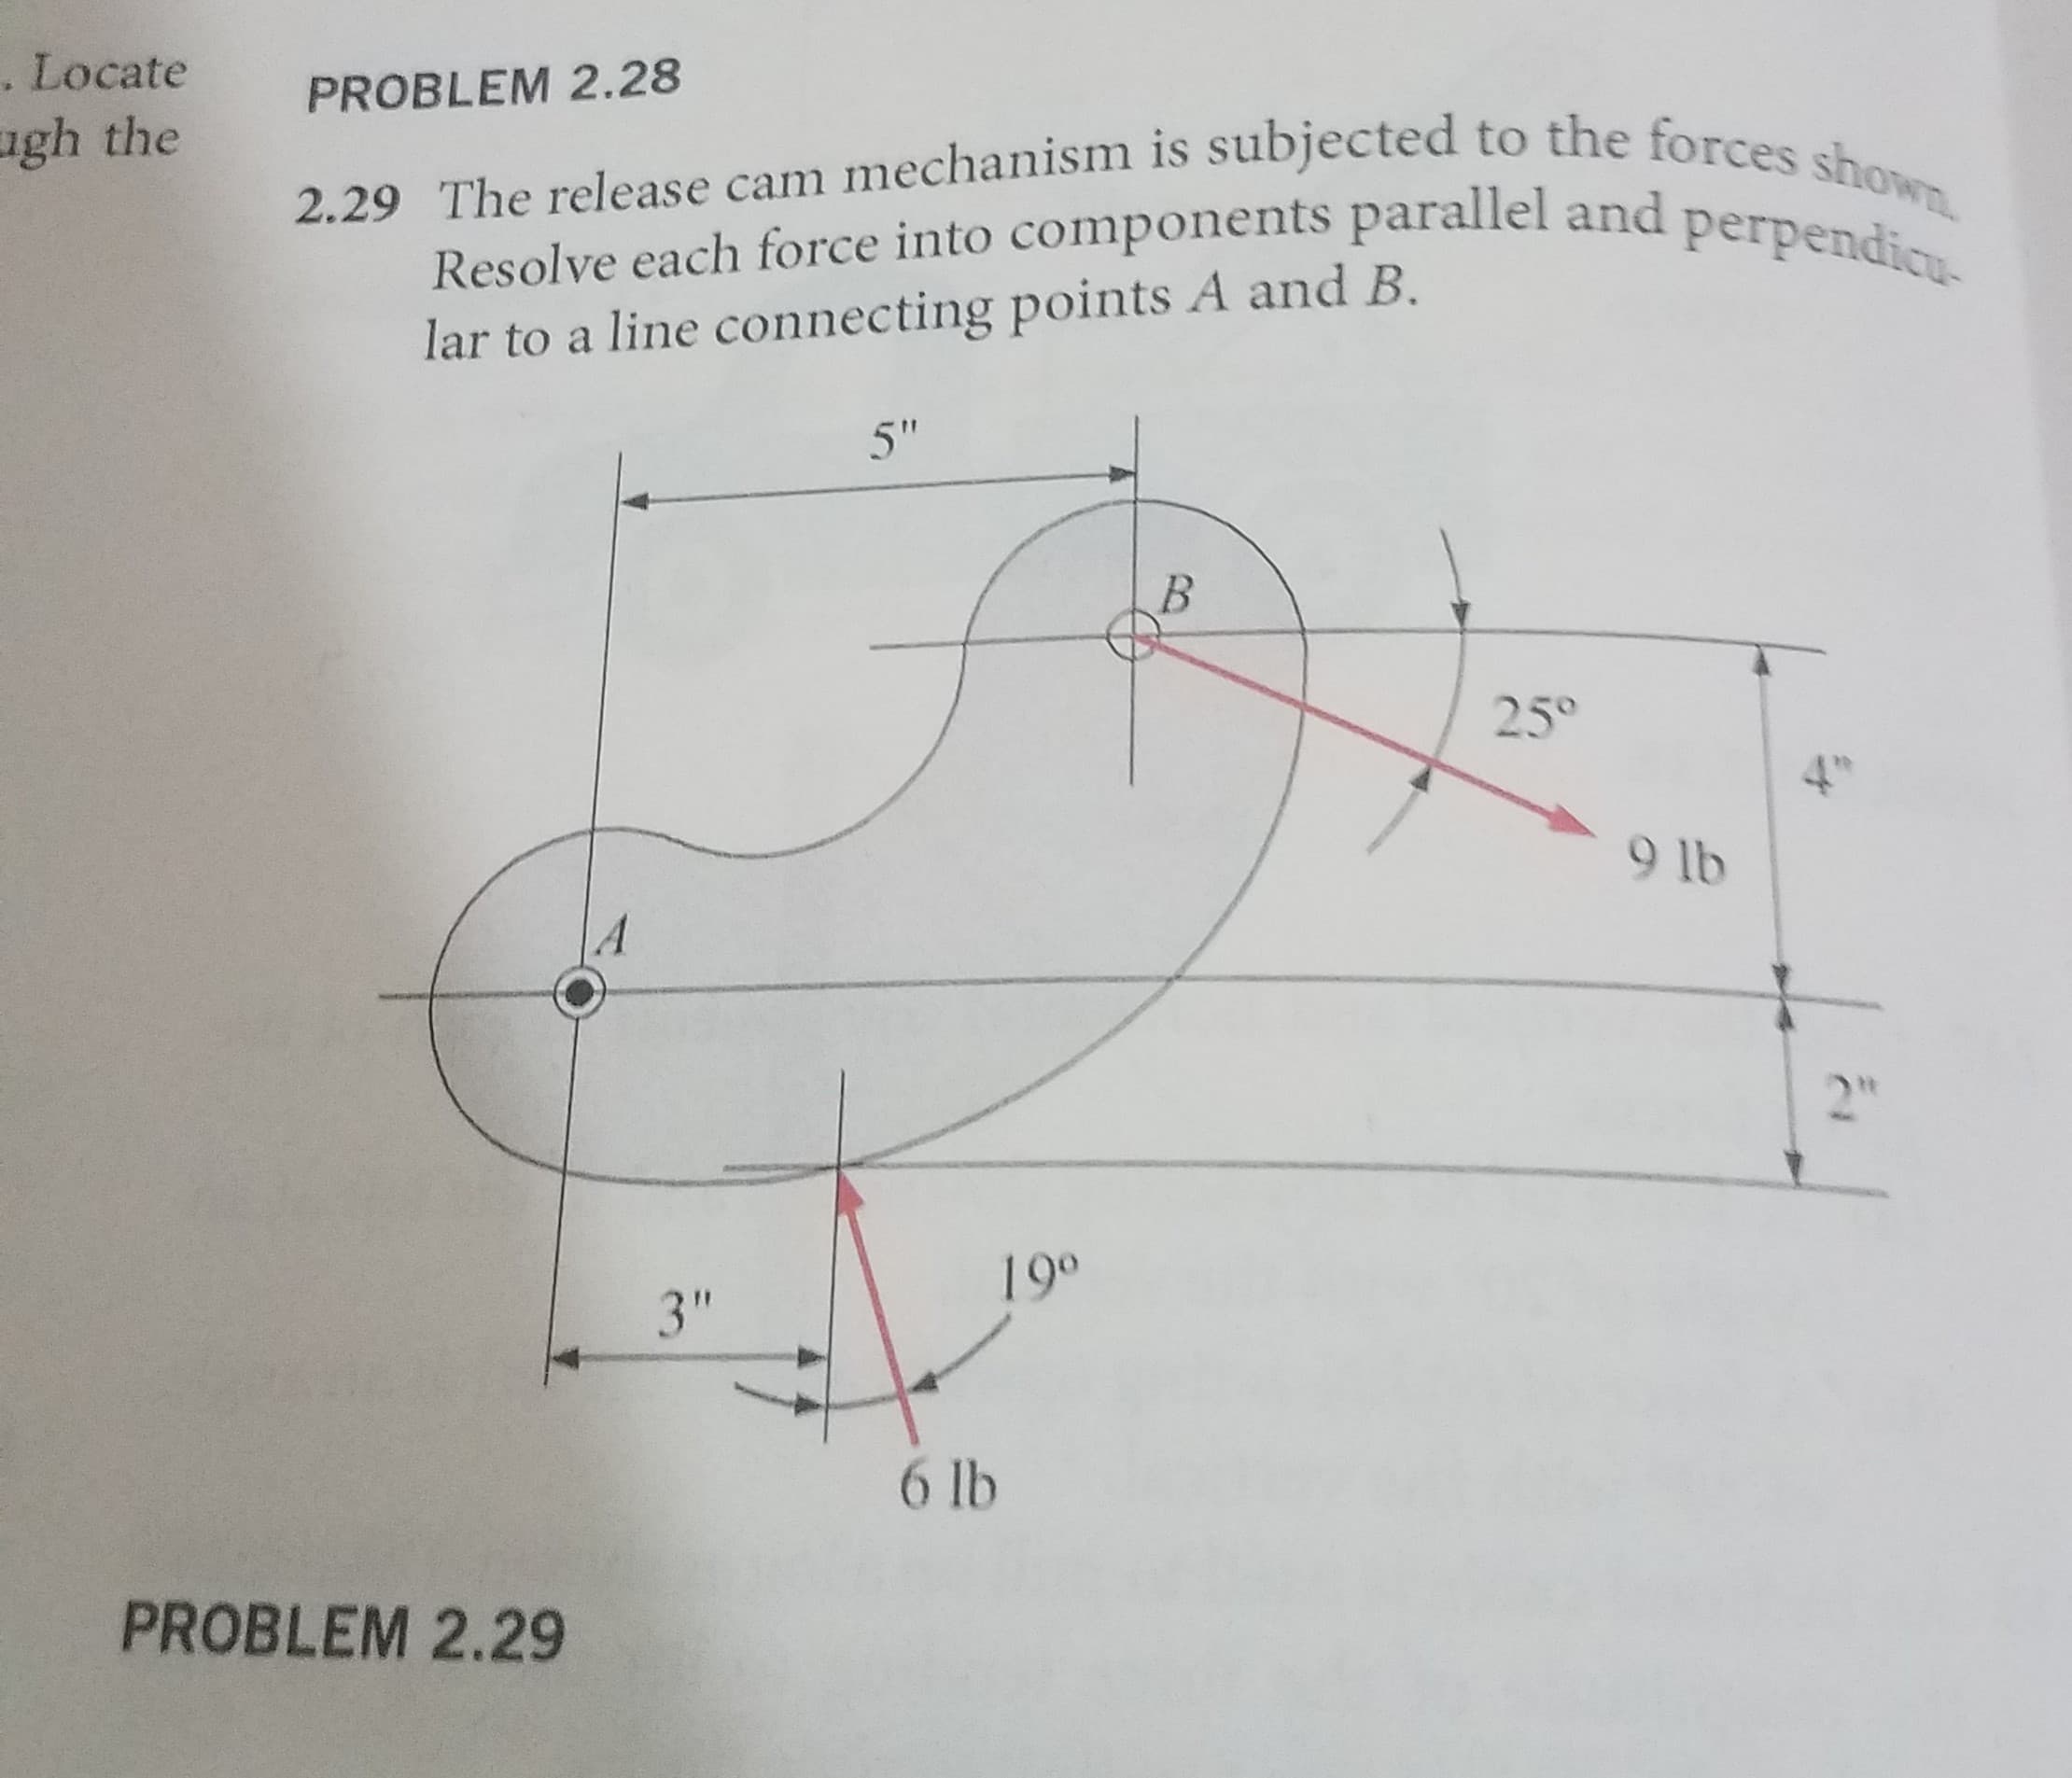 . Locate
gh the
PROBLEM 2.28
2.29 The release cam mechanism is subjected to the forces shown.
Resolve each force into components parallel and perpendicu-
lar to a line connecting points A and B.
5"
В
25°
9 lb
A
199
3"
6 lb
PROBLEM 2.29
